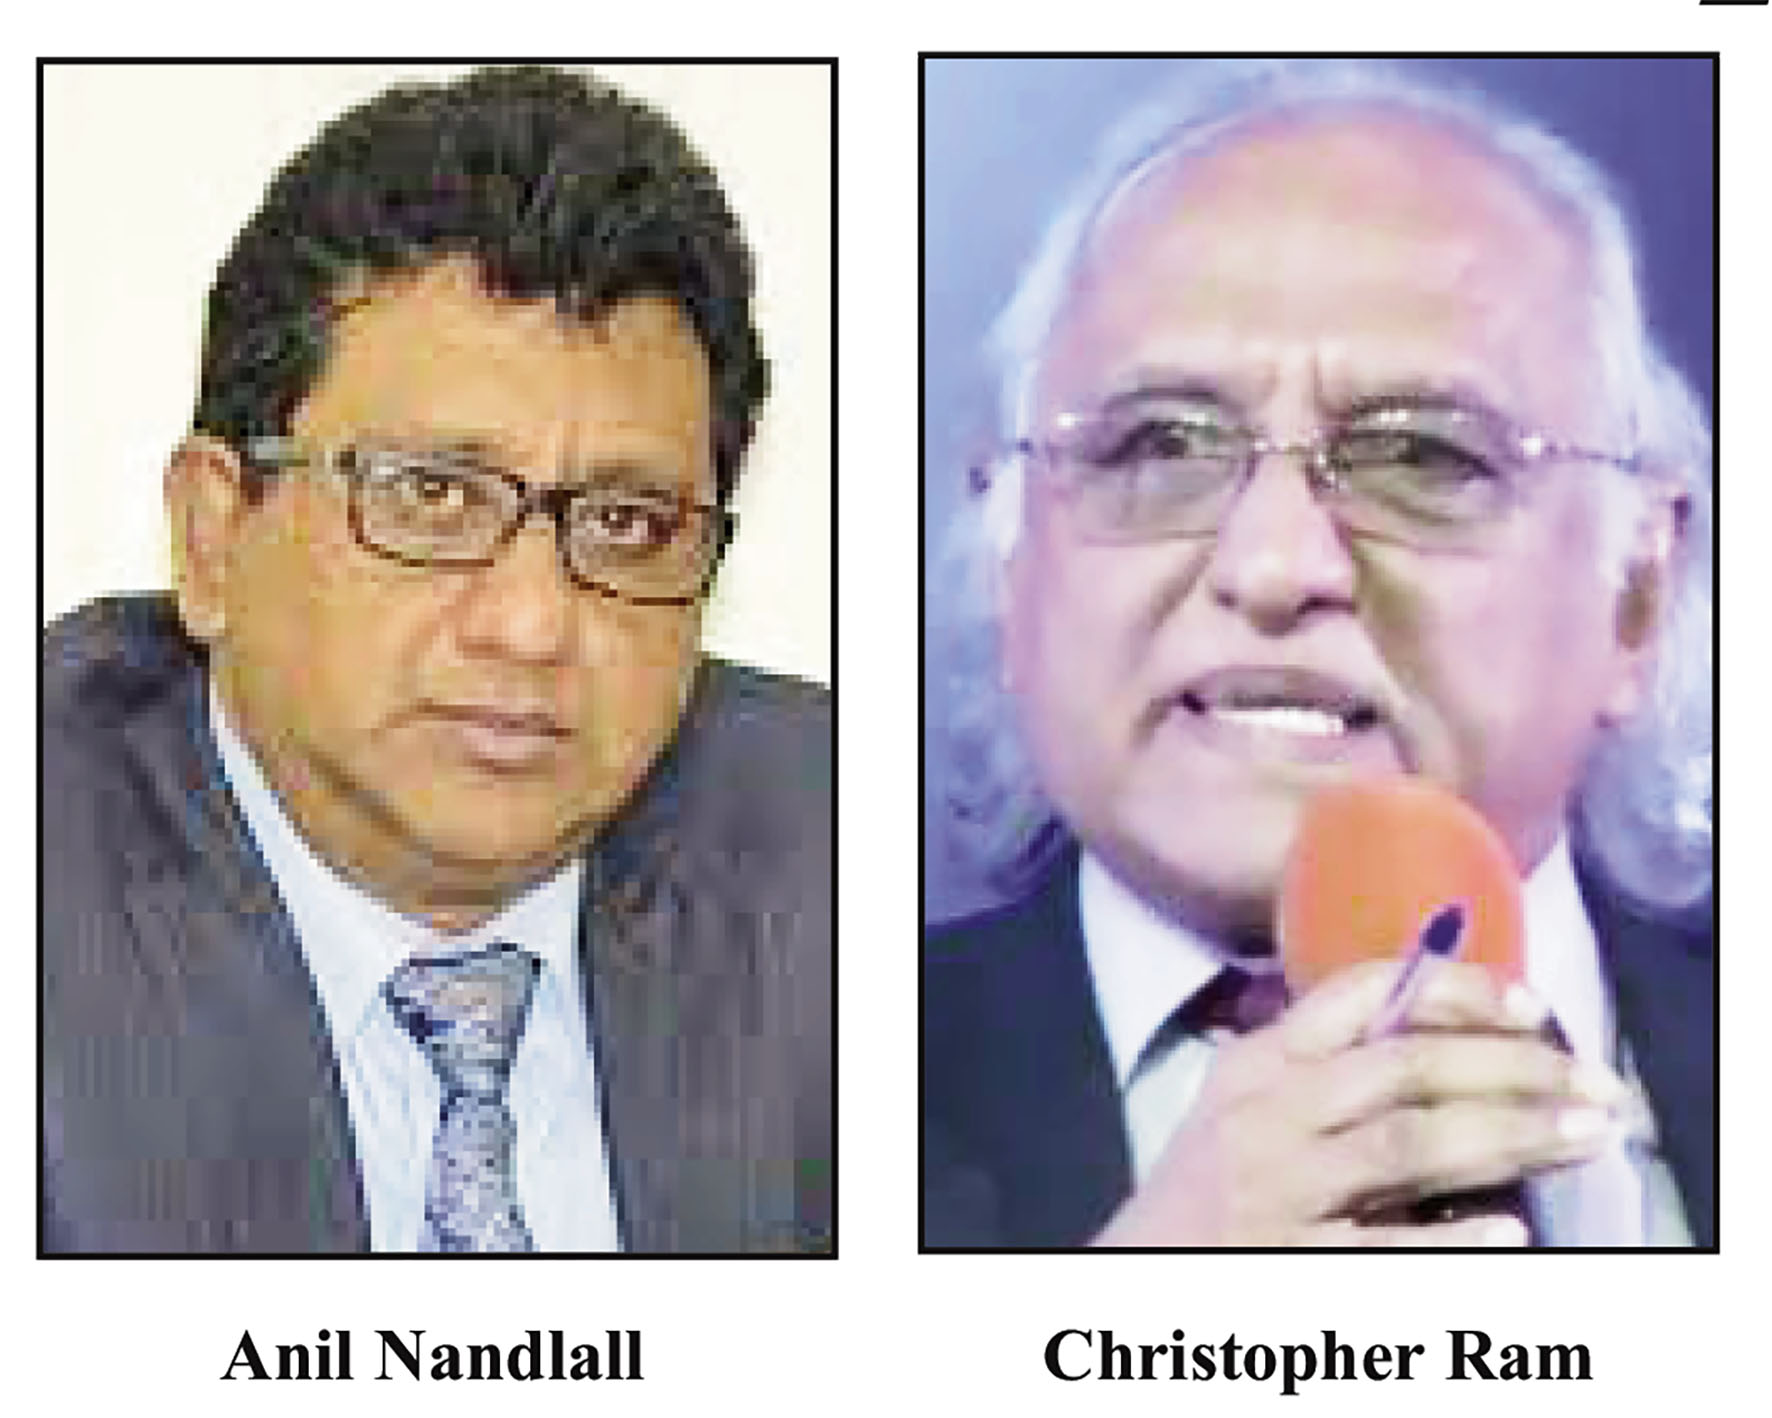 Nandlall disputes claim that NRF overstated by billions